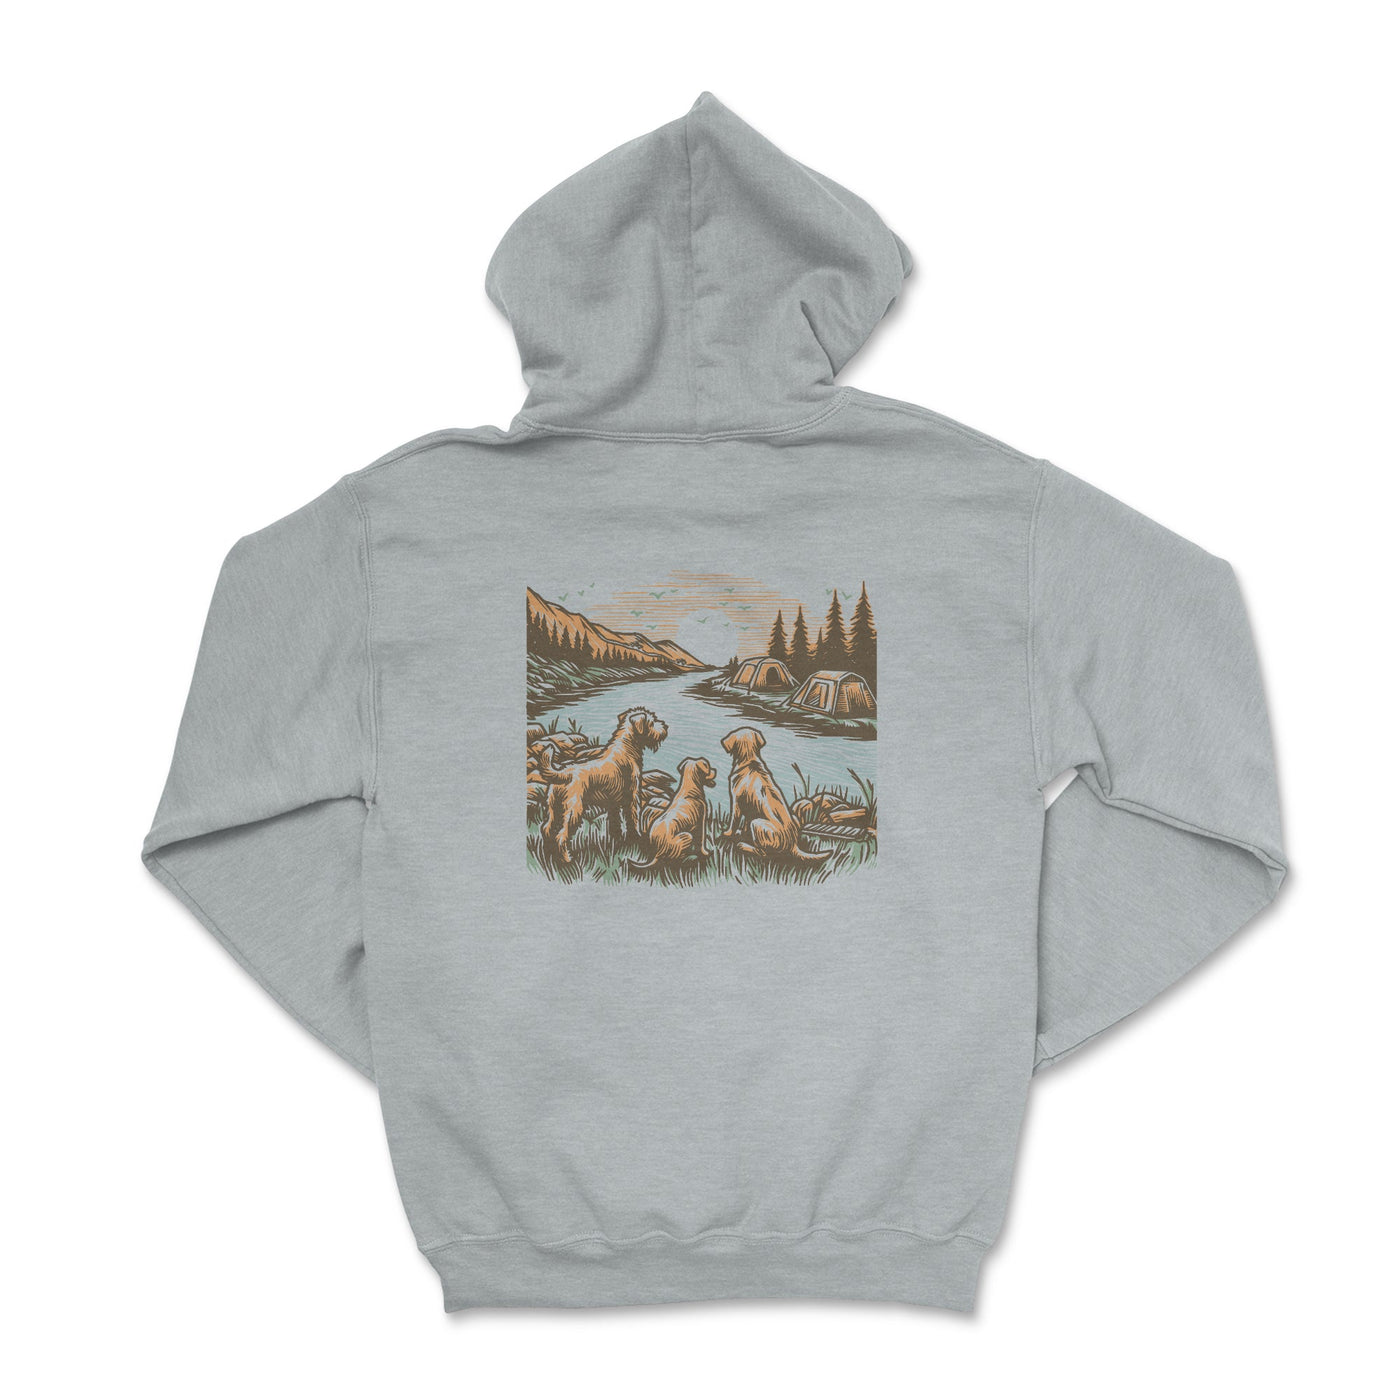 The Good Life Hoodie - Goats Trail Off-Road Apparel Company